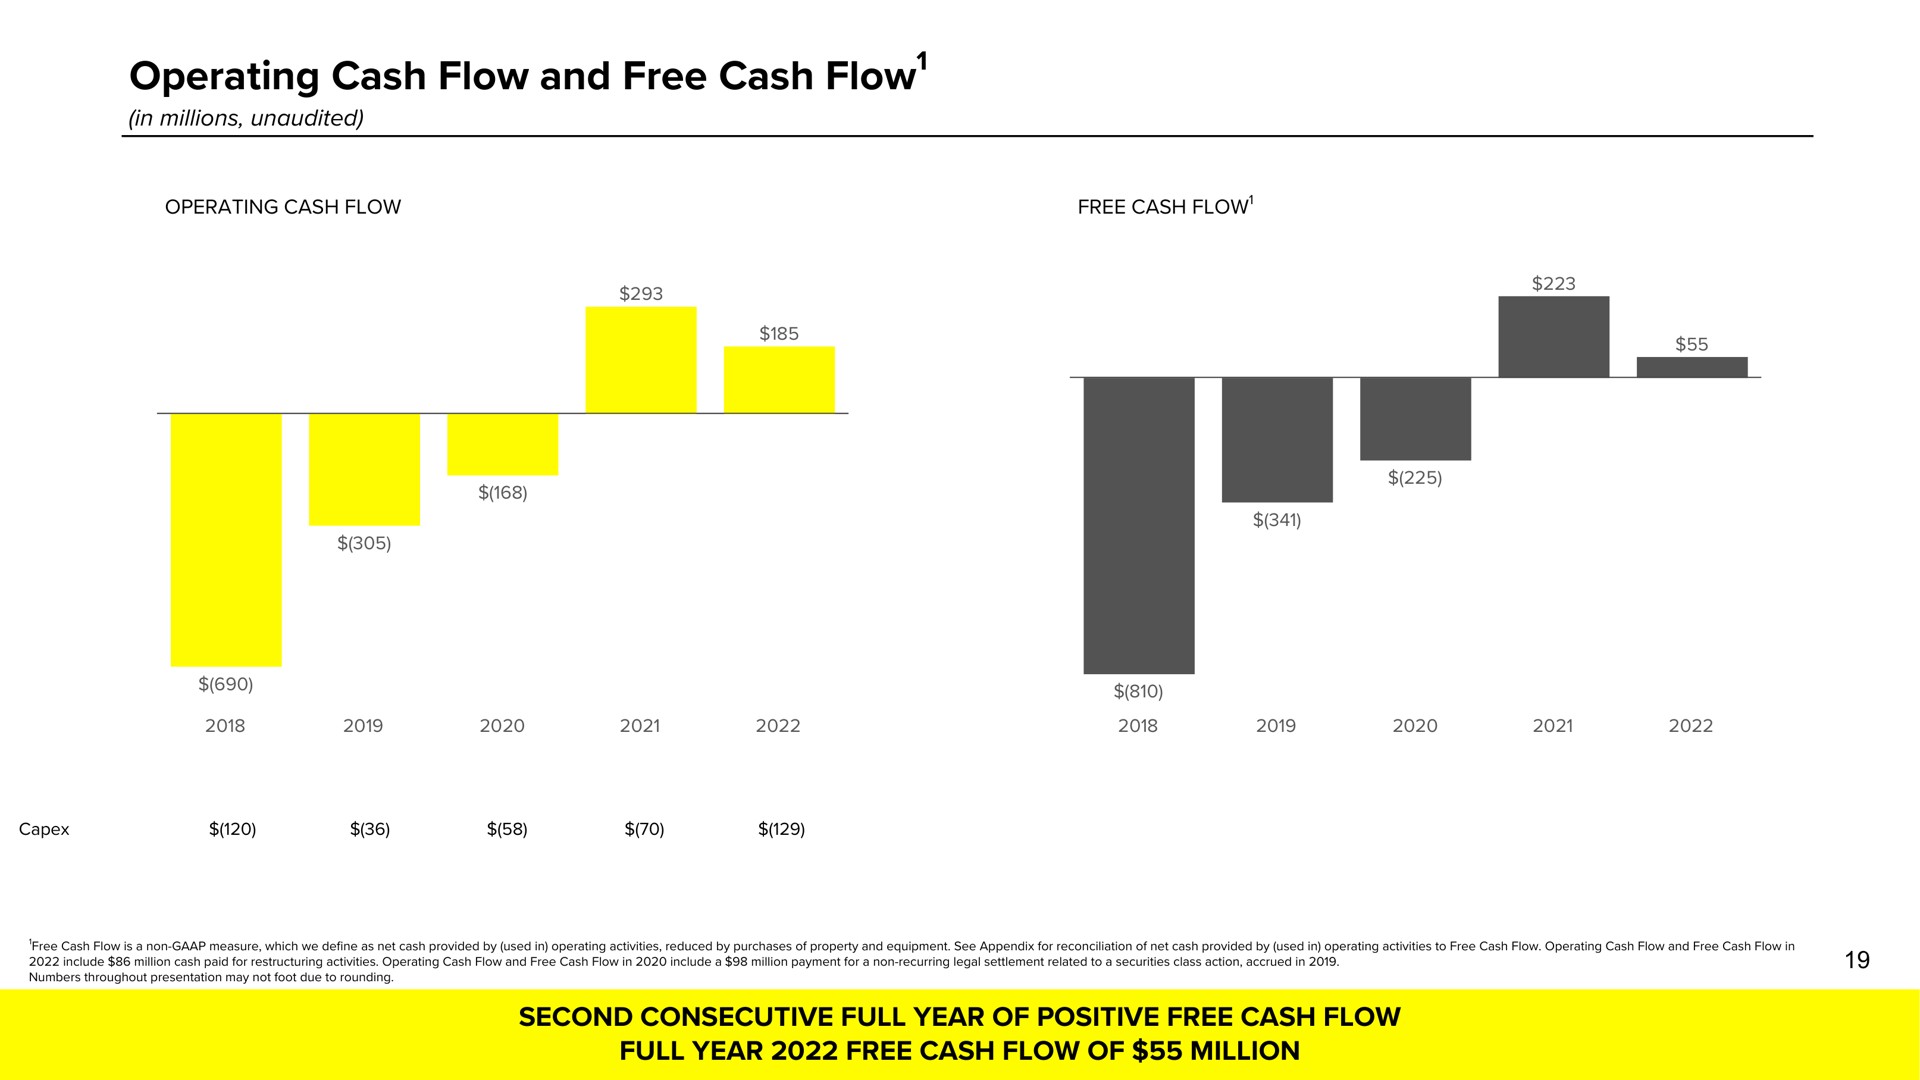 operating cash flow and free cash flow second consecutive full year of positive full year of million | Snap Inc